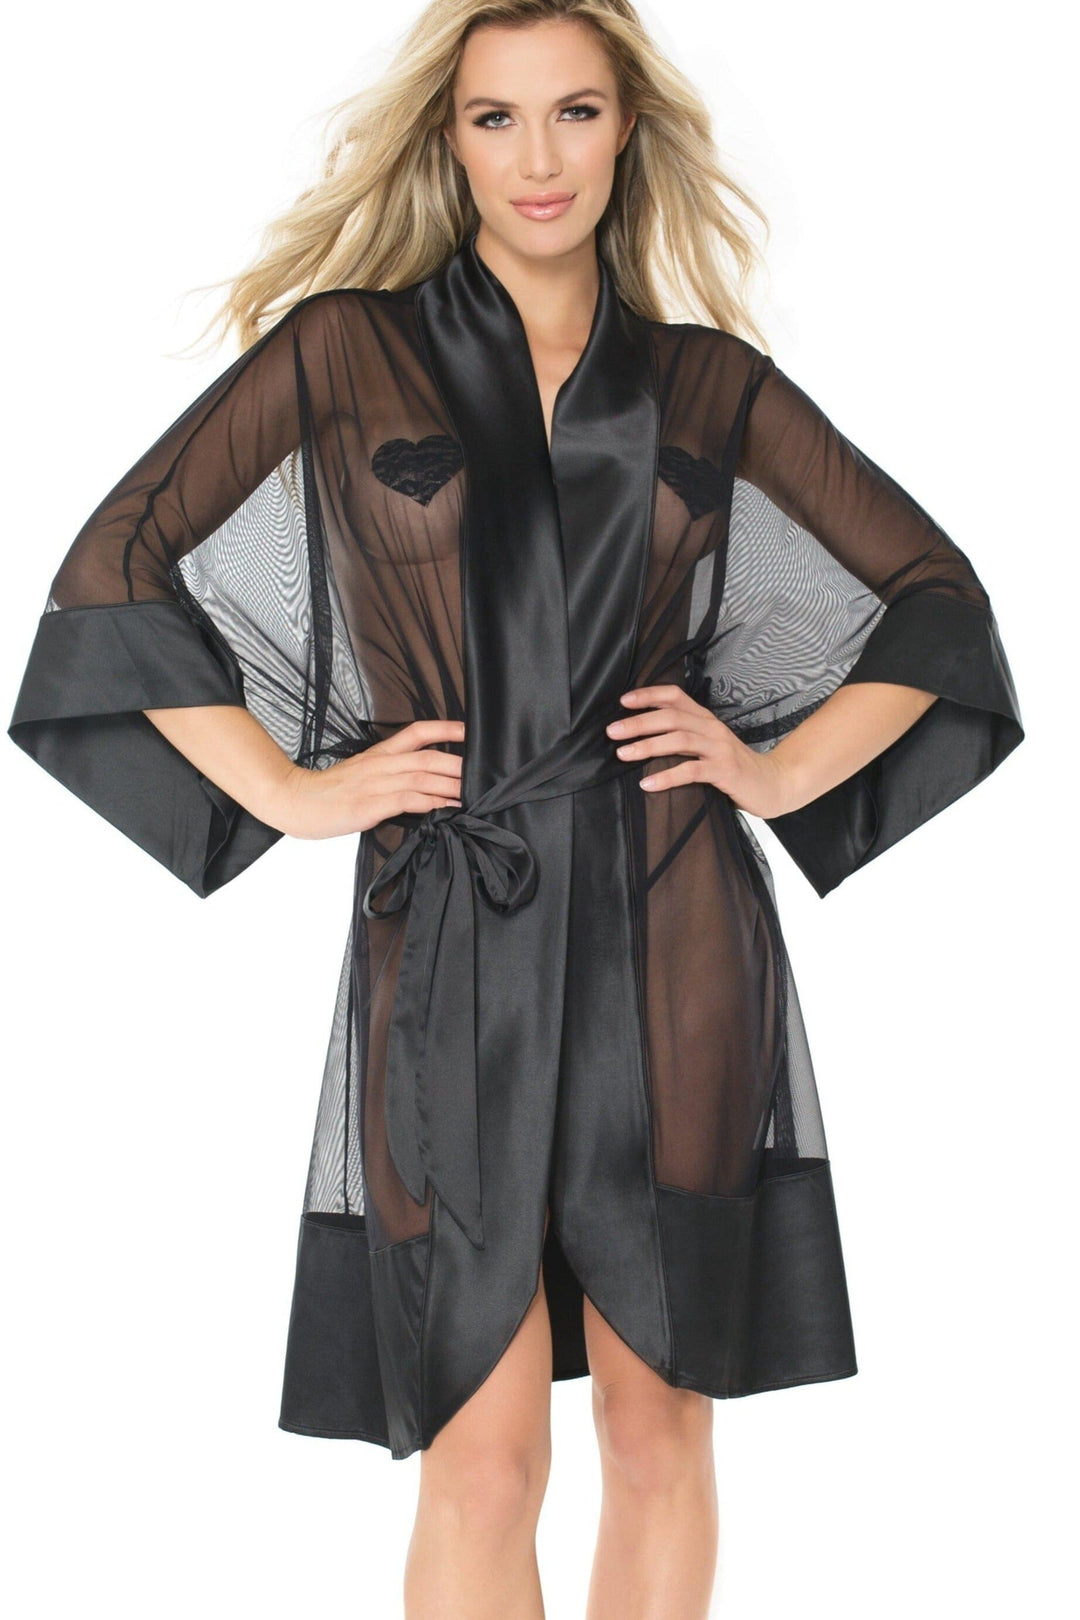 Sheer Kimono Style Robe-Gowns + Robes-Coquette-Black-O/S-SEXYSHOES.COM